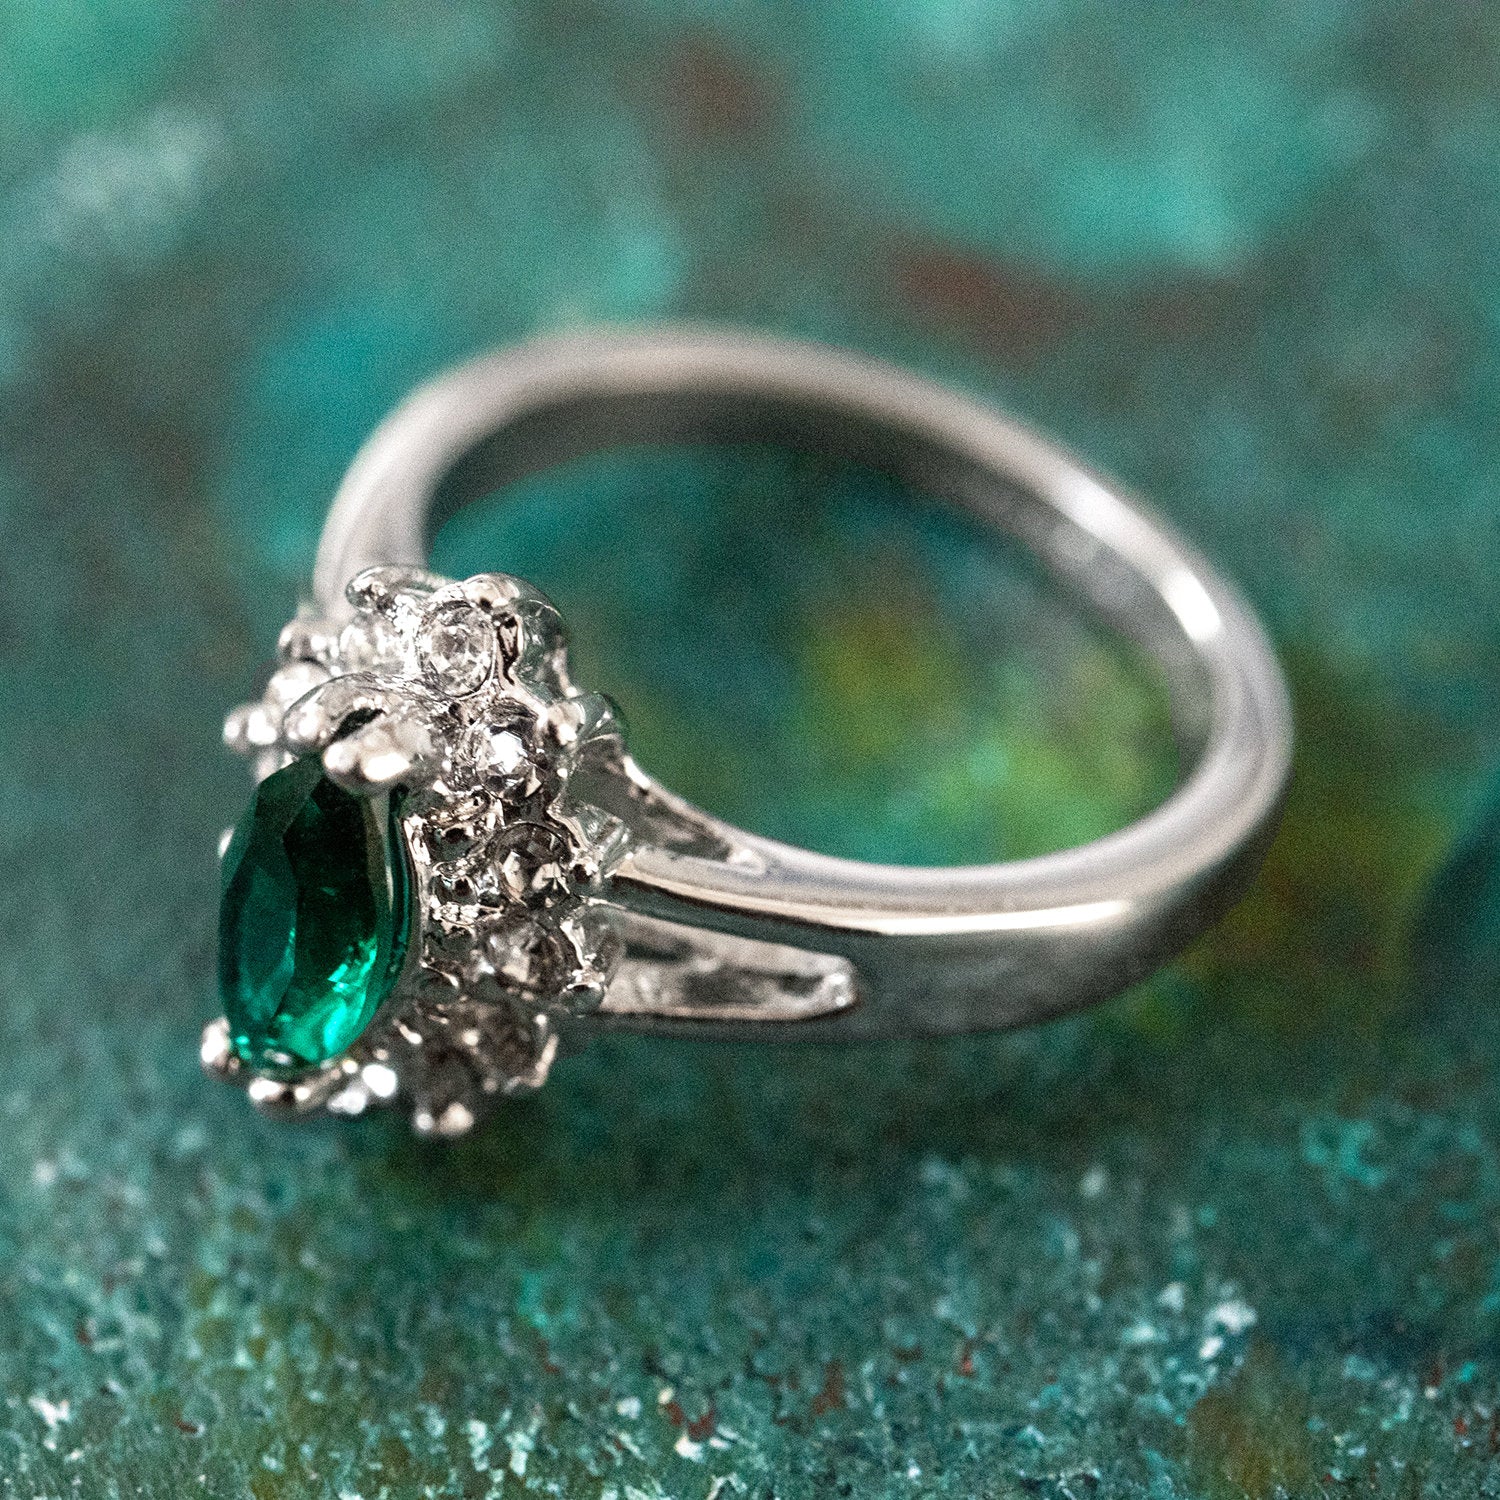 Vintage Ring Emerald and Clear Swarovski Crystals 18kt White Gold Silver  R1314 - Limited Stock - Never Worn